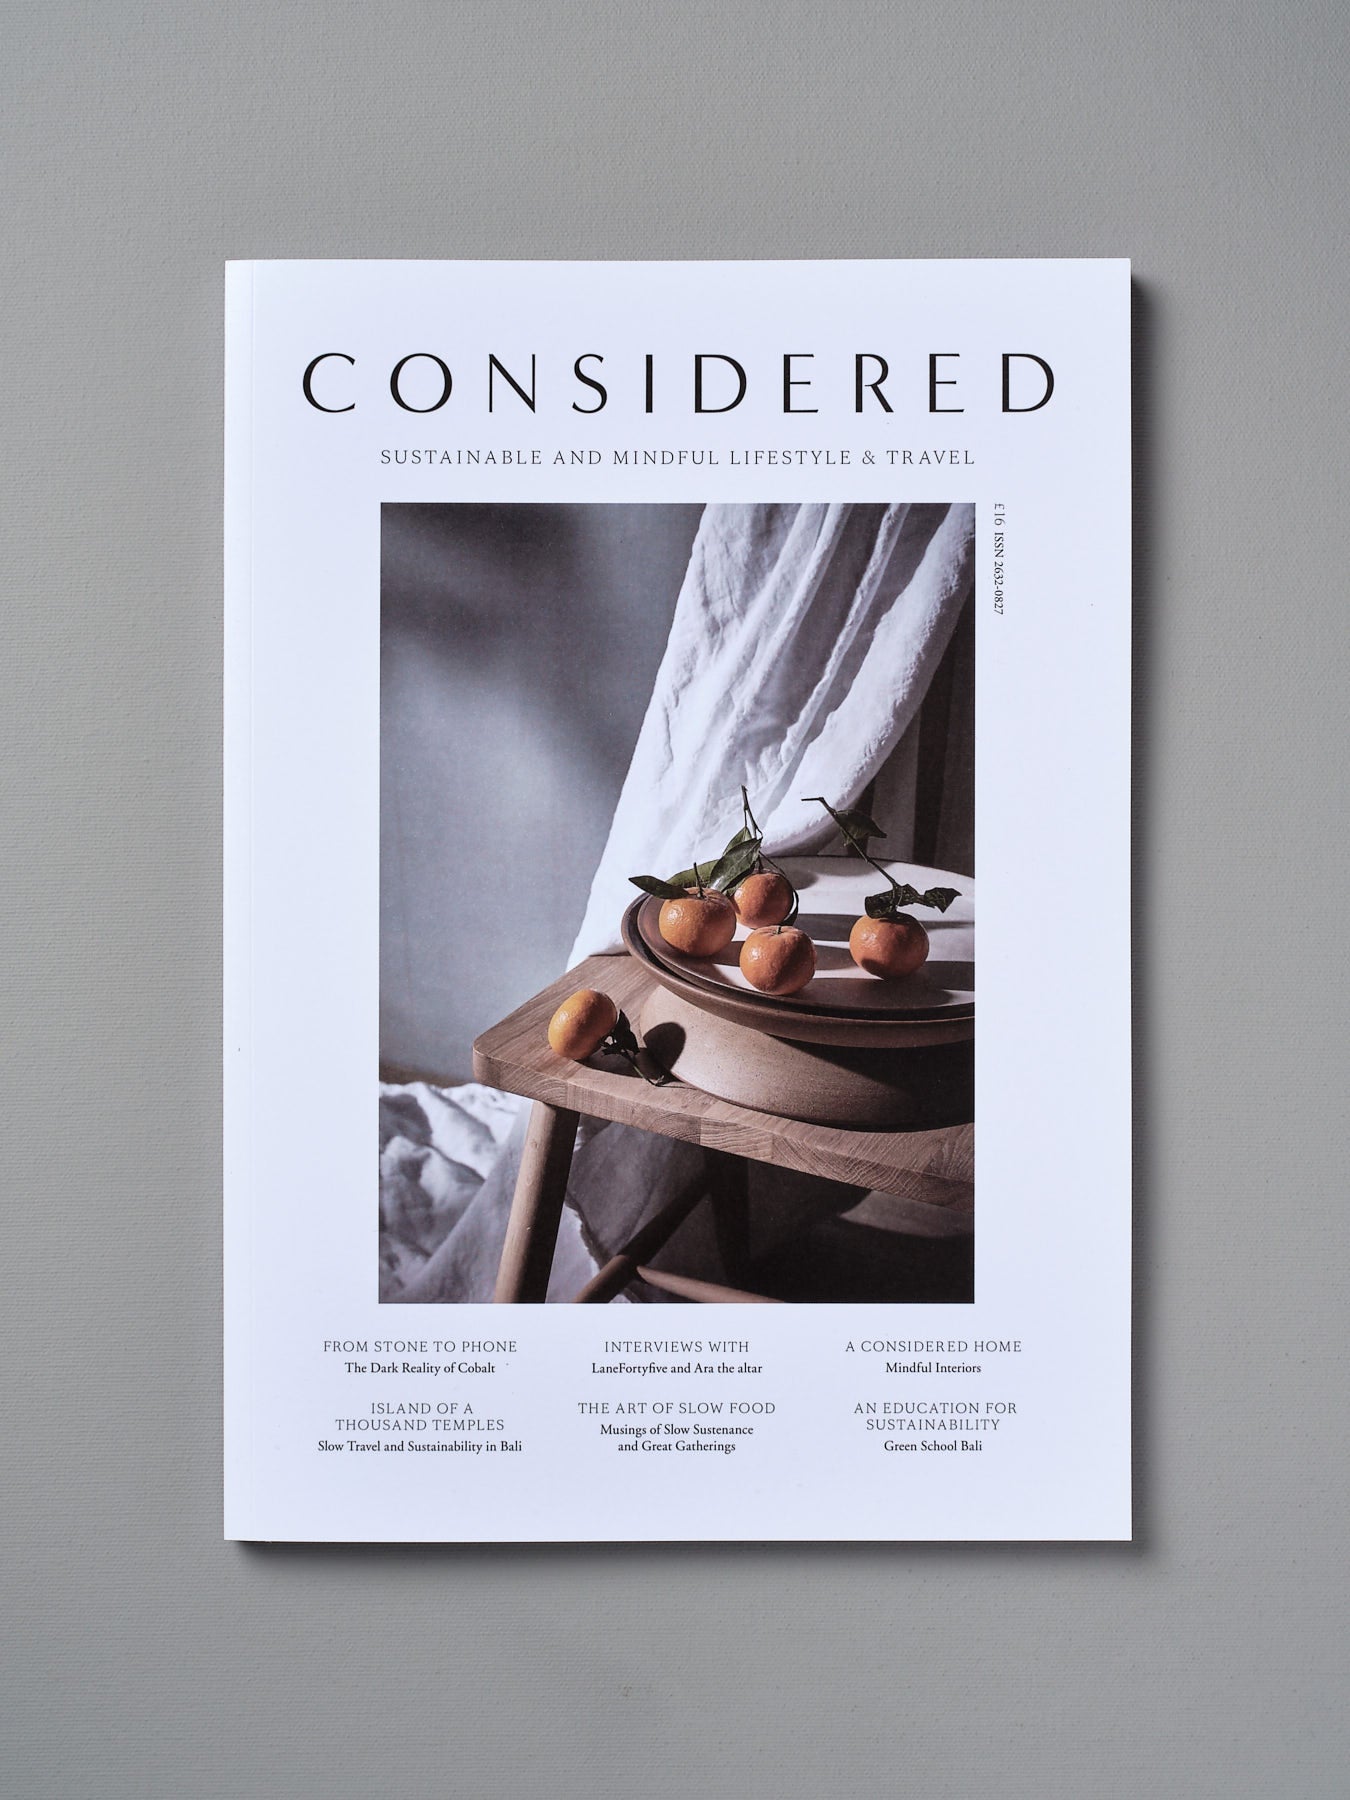 The cover of CONSIDERED Magazine – Vol 2, by Considered Magazine, was considered.